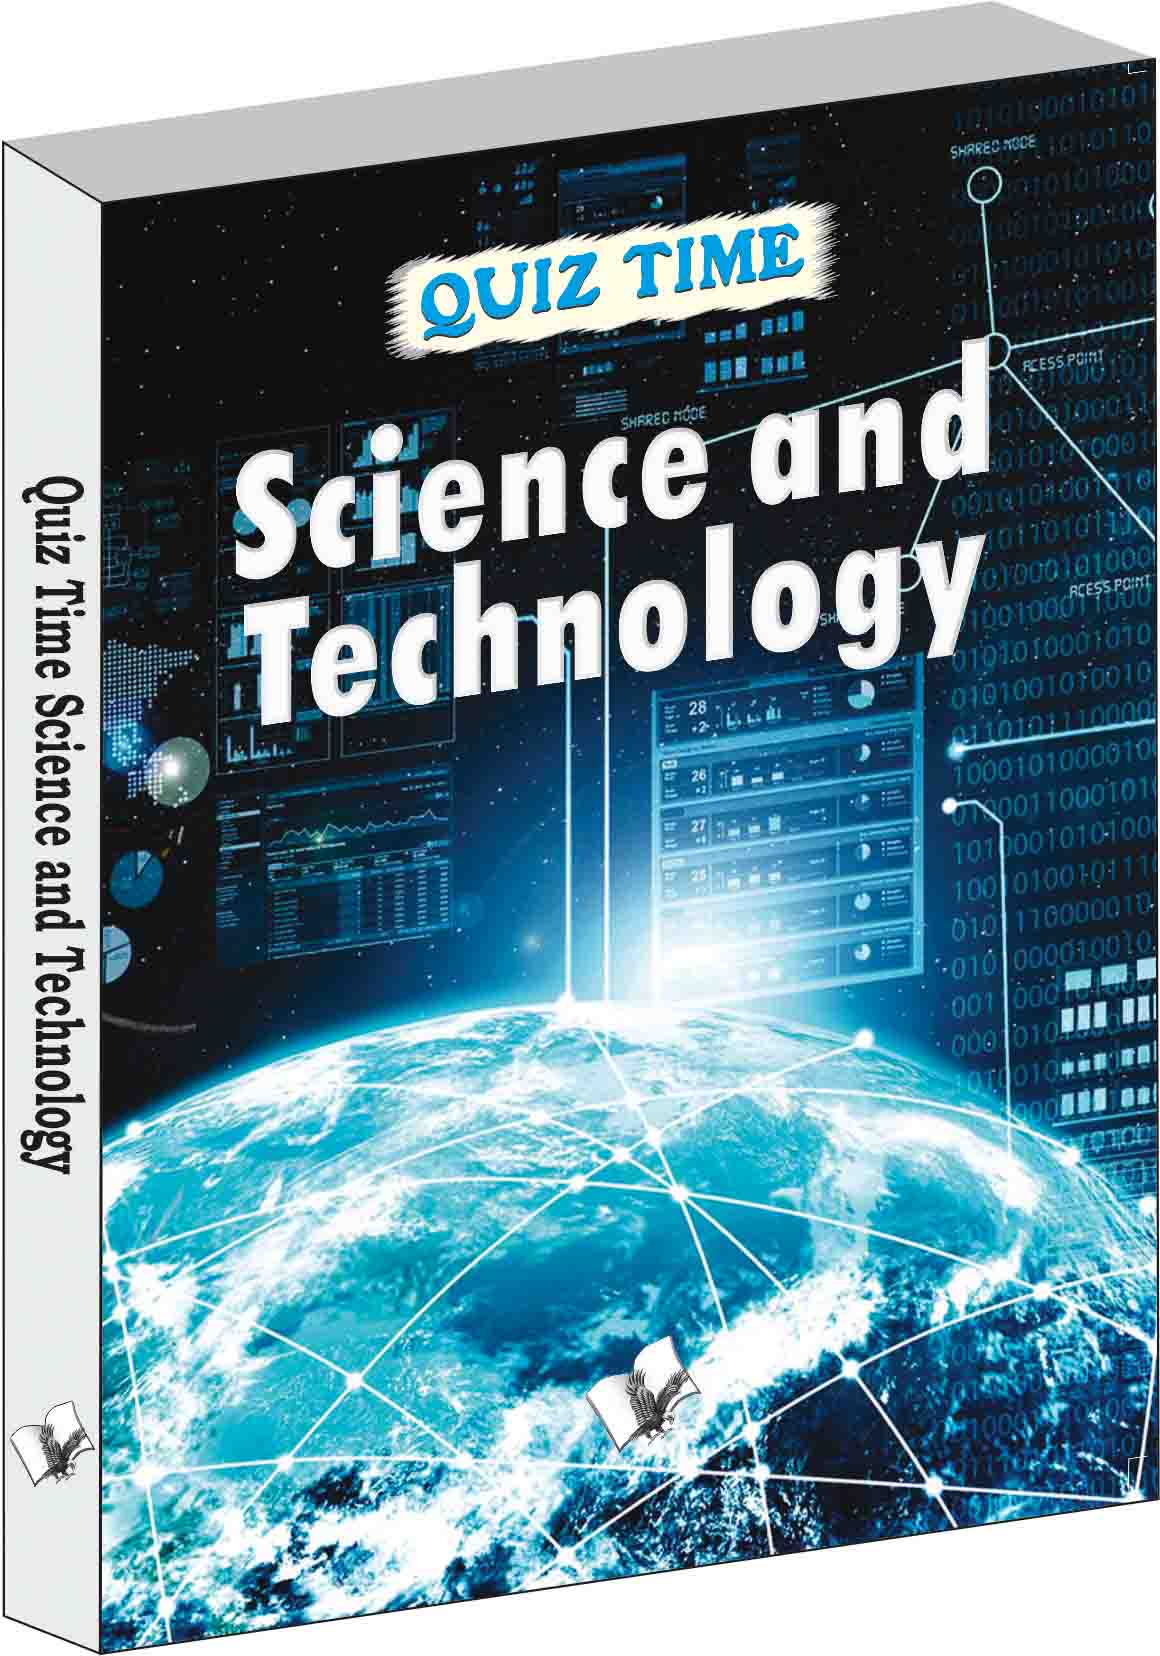 Quiz Time Science & Technology-Best bet for knowledge and entertainment